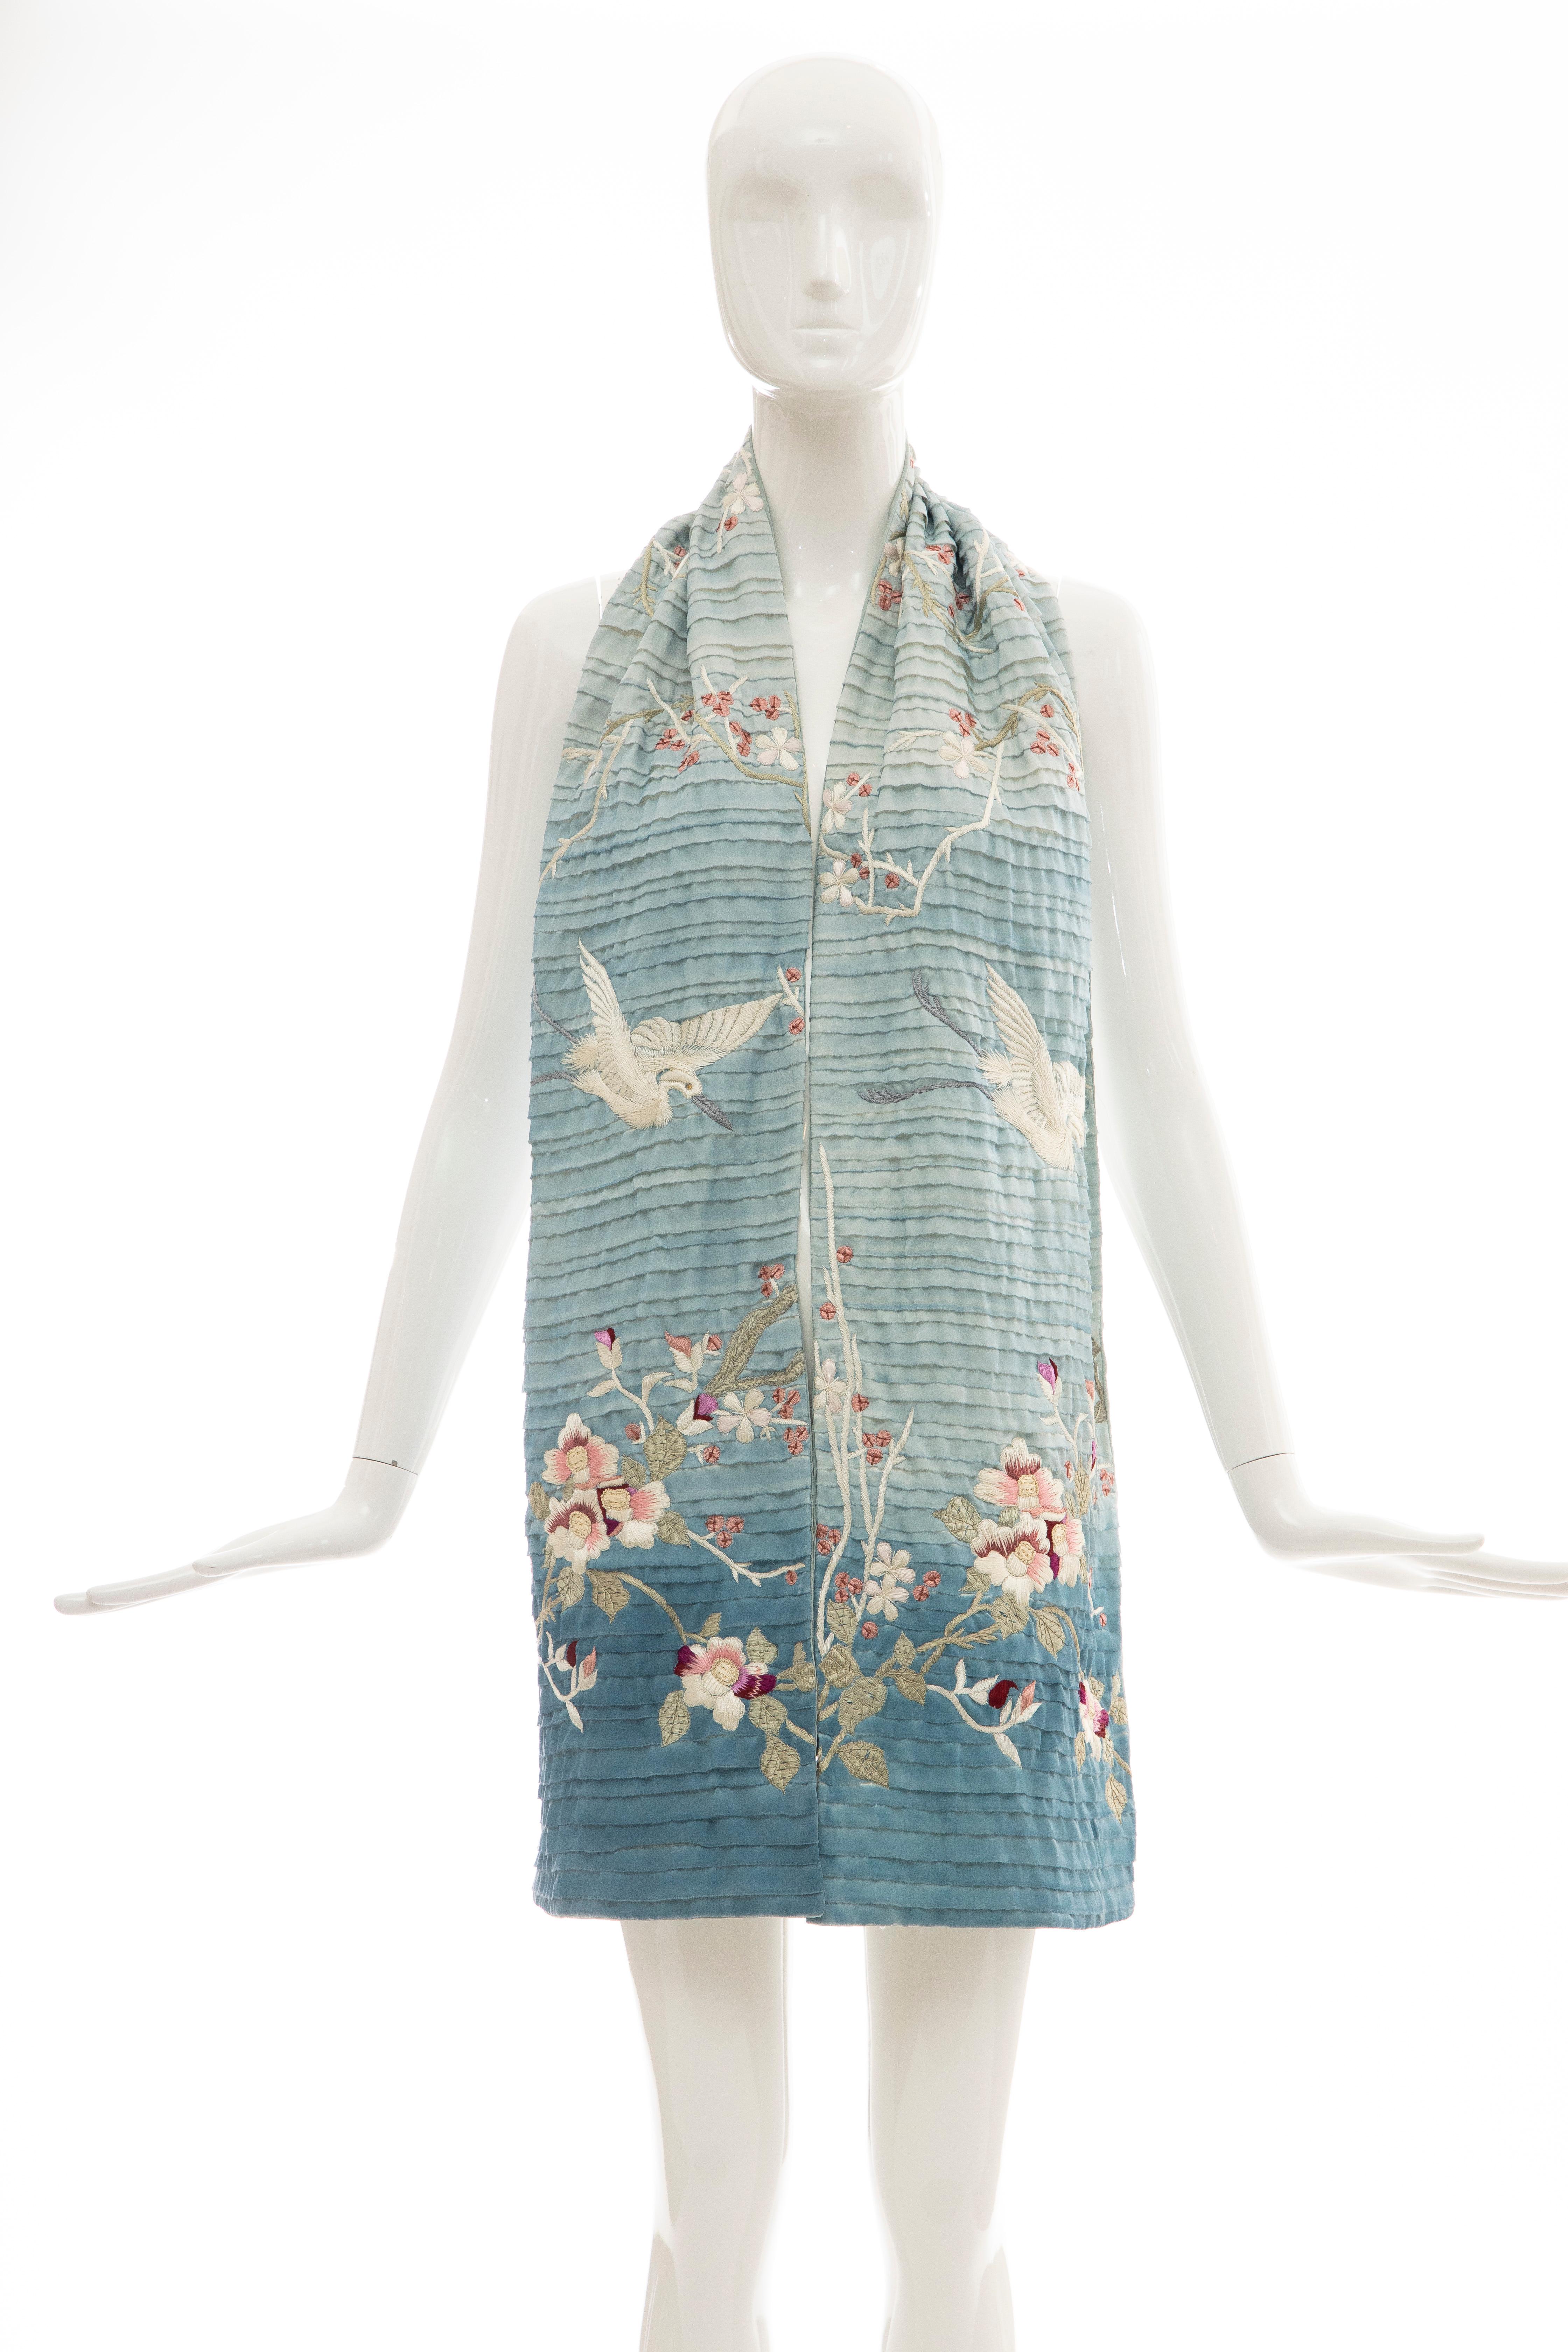 Tom Ford for Gucci, Spring 2003 silk ombré embroidered scarf.

Length: 76, Width: 11

Fabric: 100% Silk